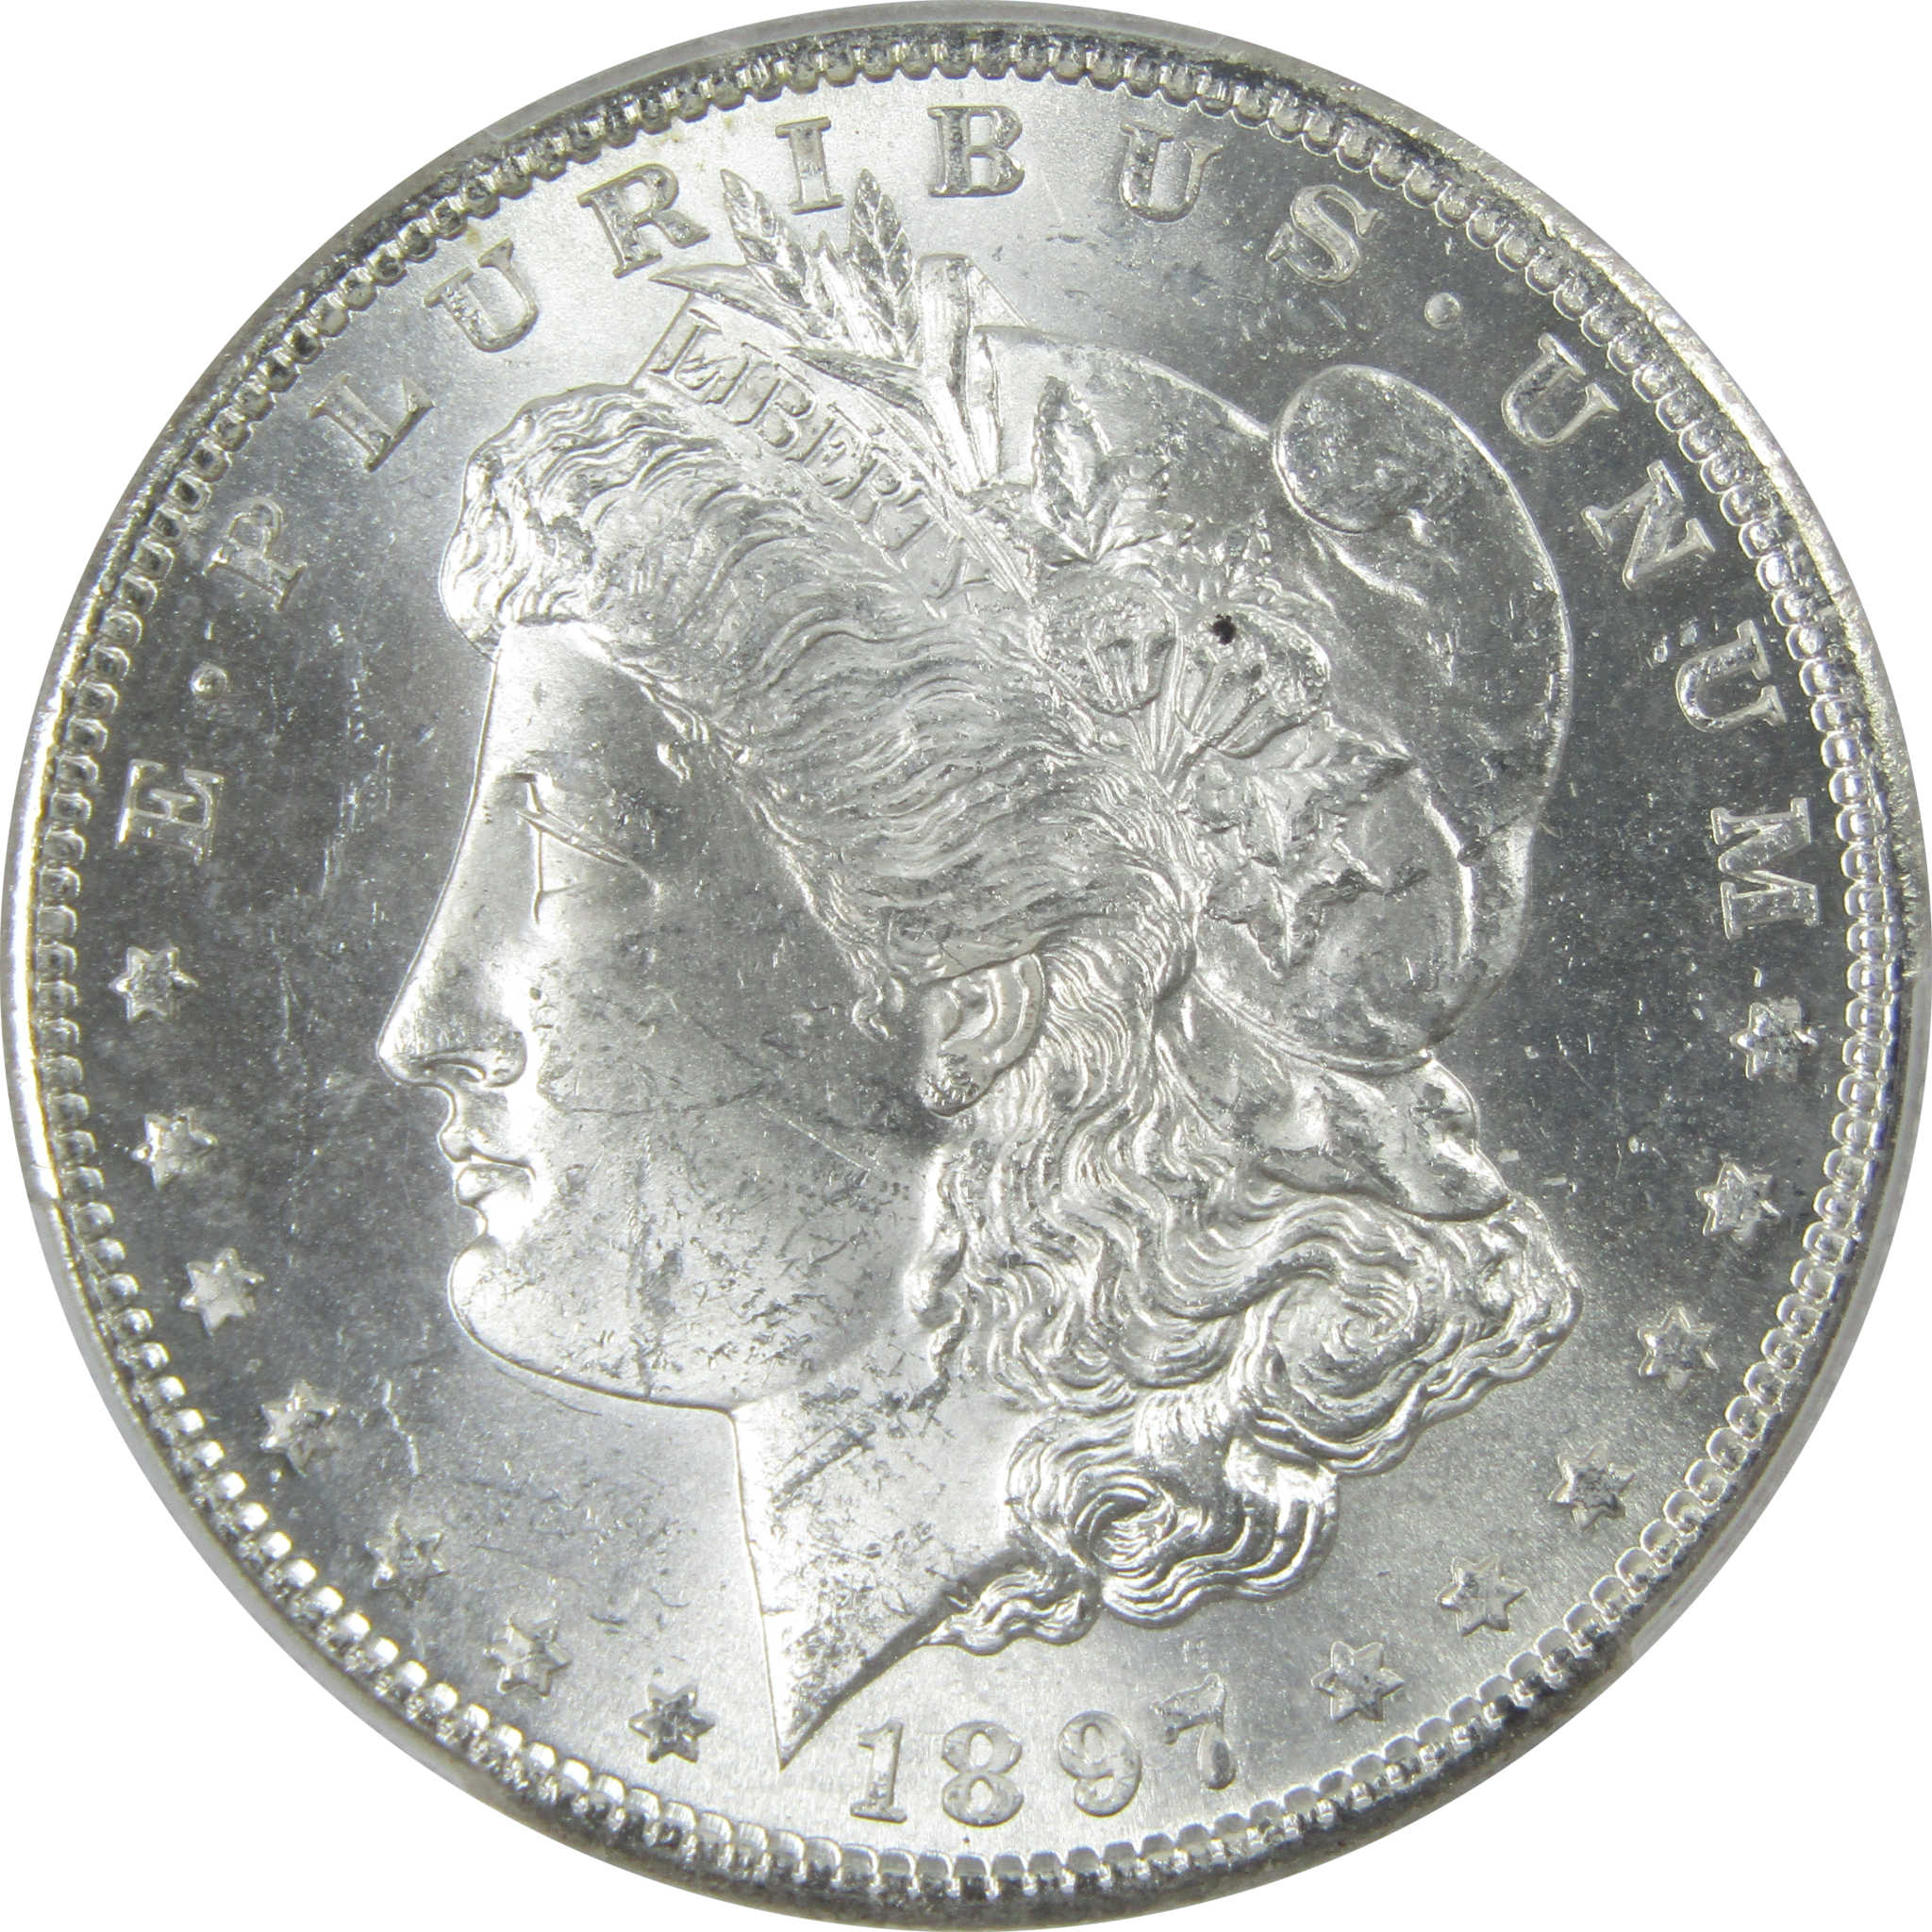 1897 S Morgan Dollar MS 64 PCGS Silver $1 Uncirculated Coin SKU:I13924 - Morgan coin - Morgan silver dollar - Morgan silver dollar for sale - Profile Coins &amp; Collectibles